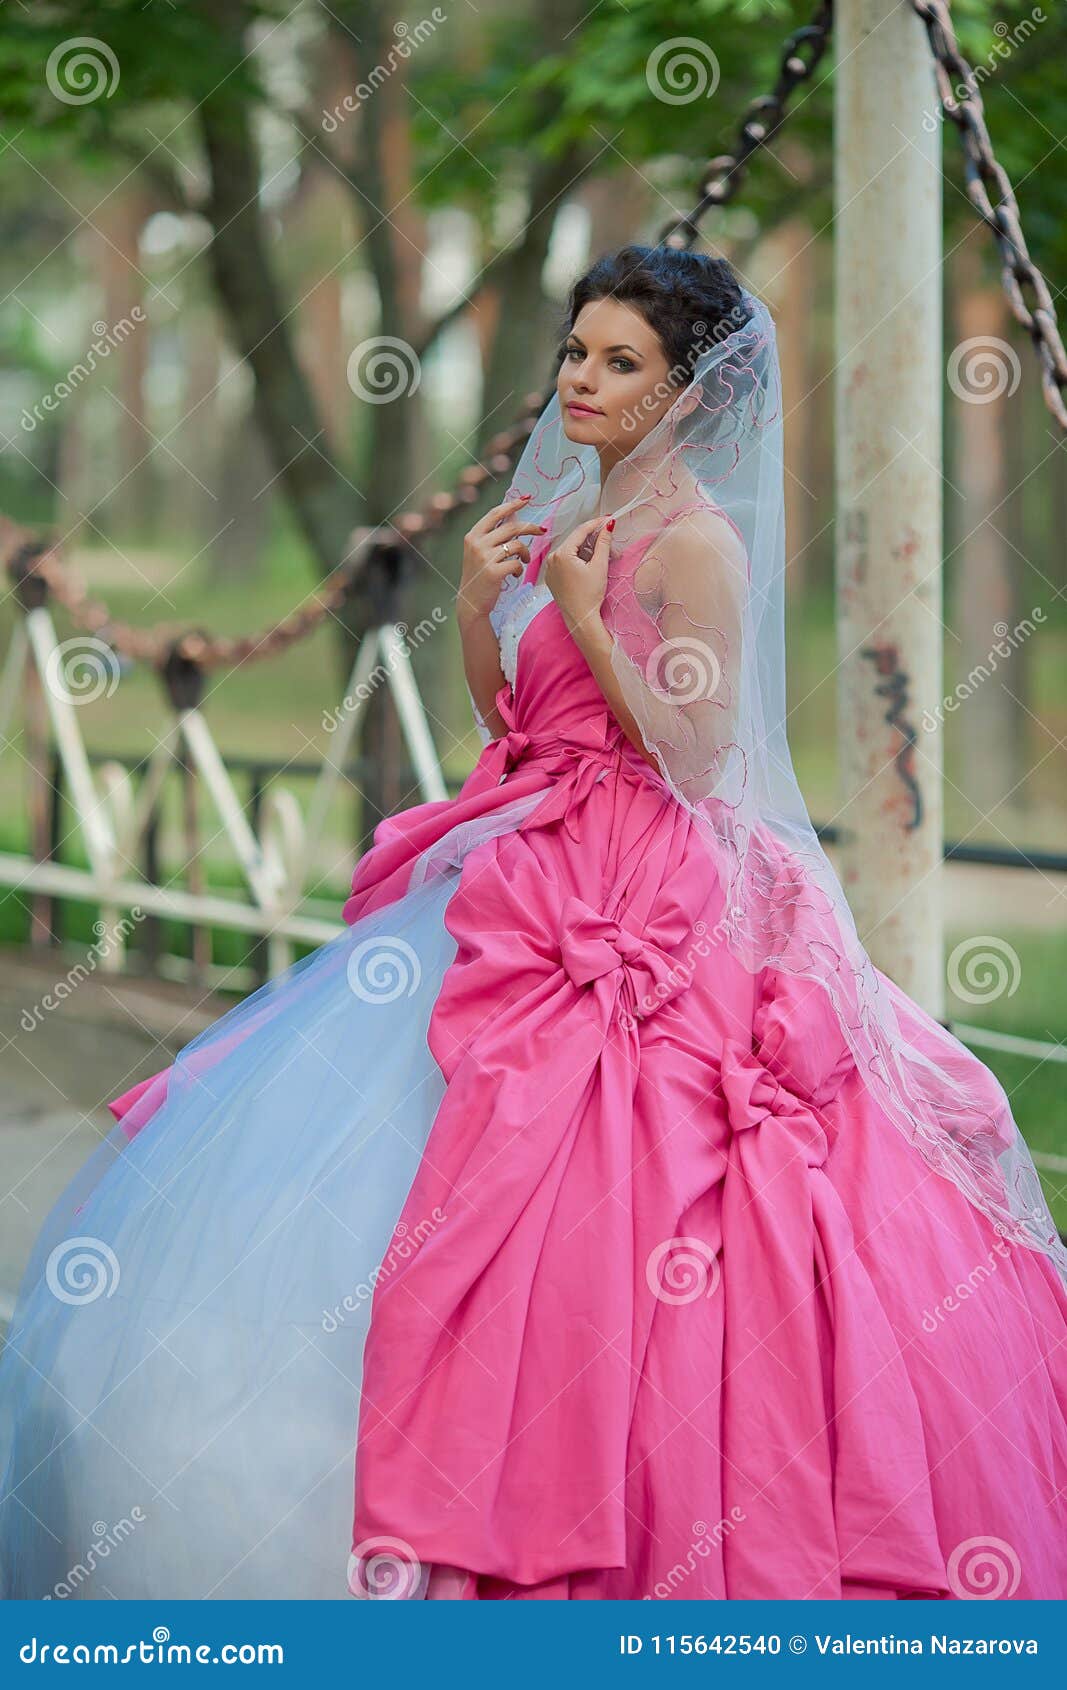 Pink strapless floral gown  alrosier  FairyGothMother